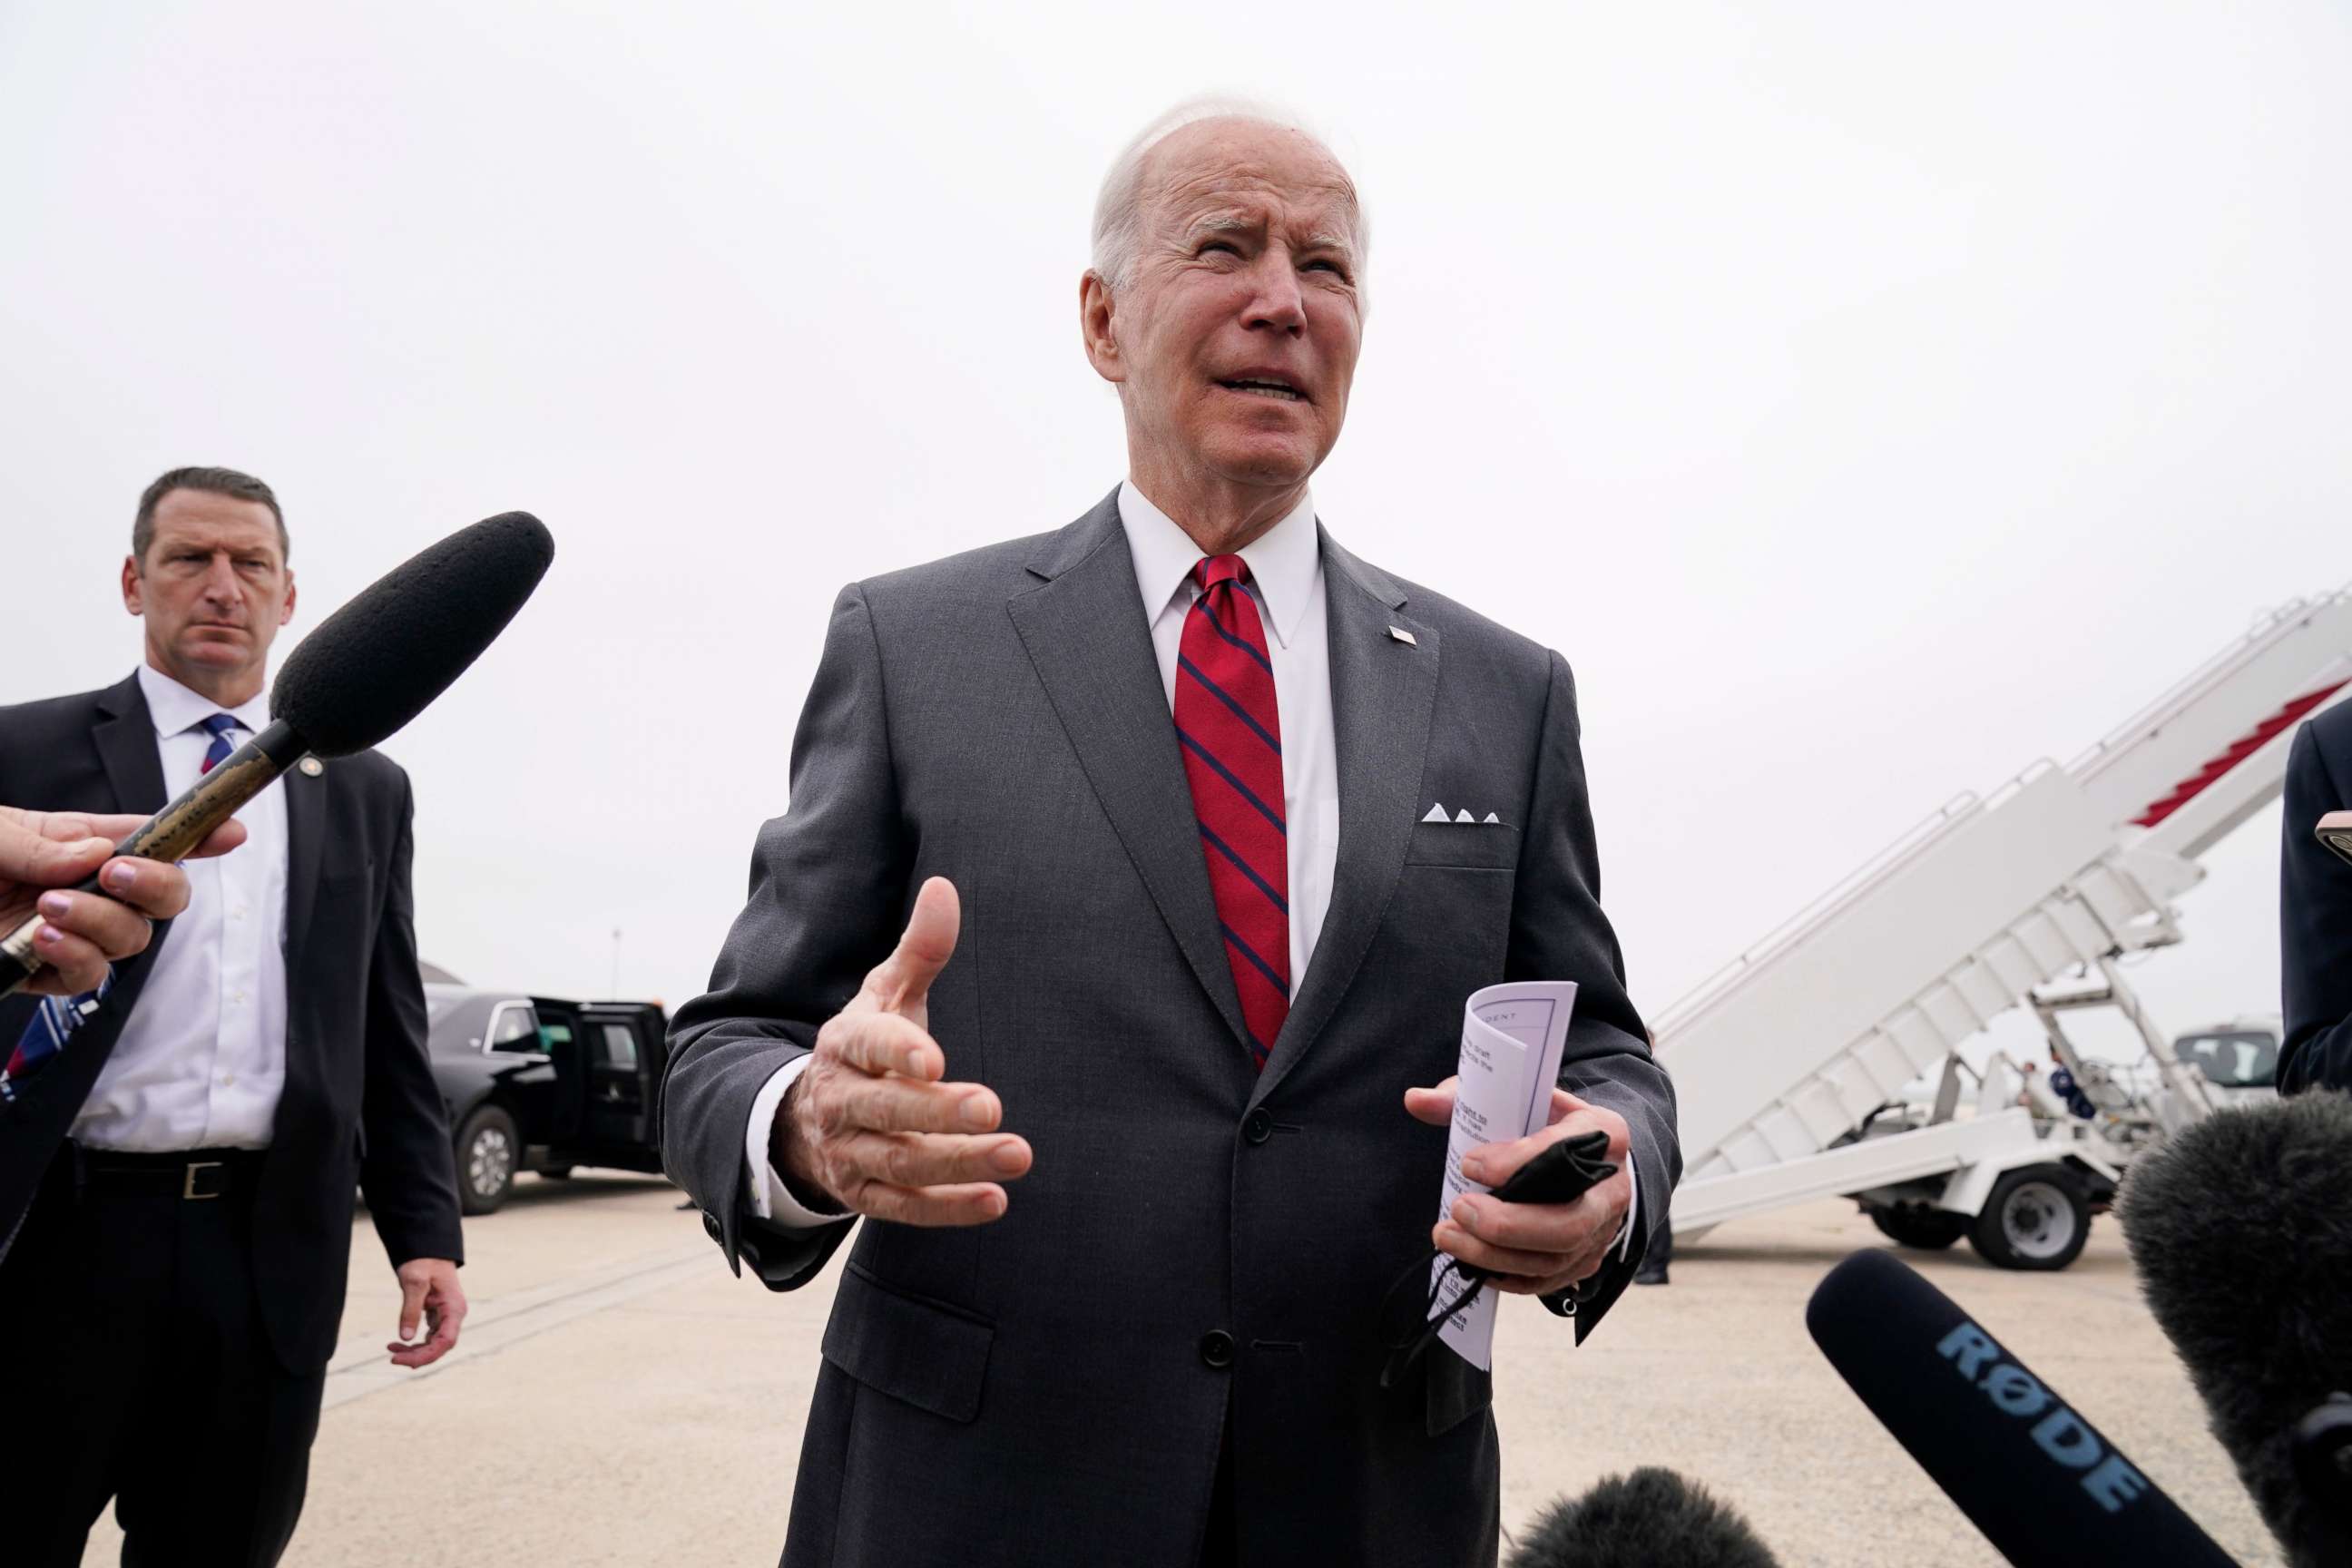 PHOTO: President Joe Biden speaks to the media before boarding Air Force One for a trip to Alabama to visit a Lockheed Martin plant, May 3, 2022, in Andrews Air Force Base, Md.